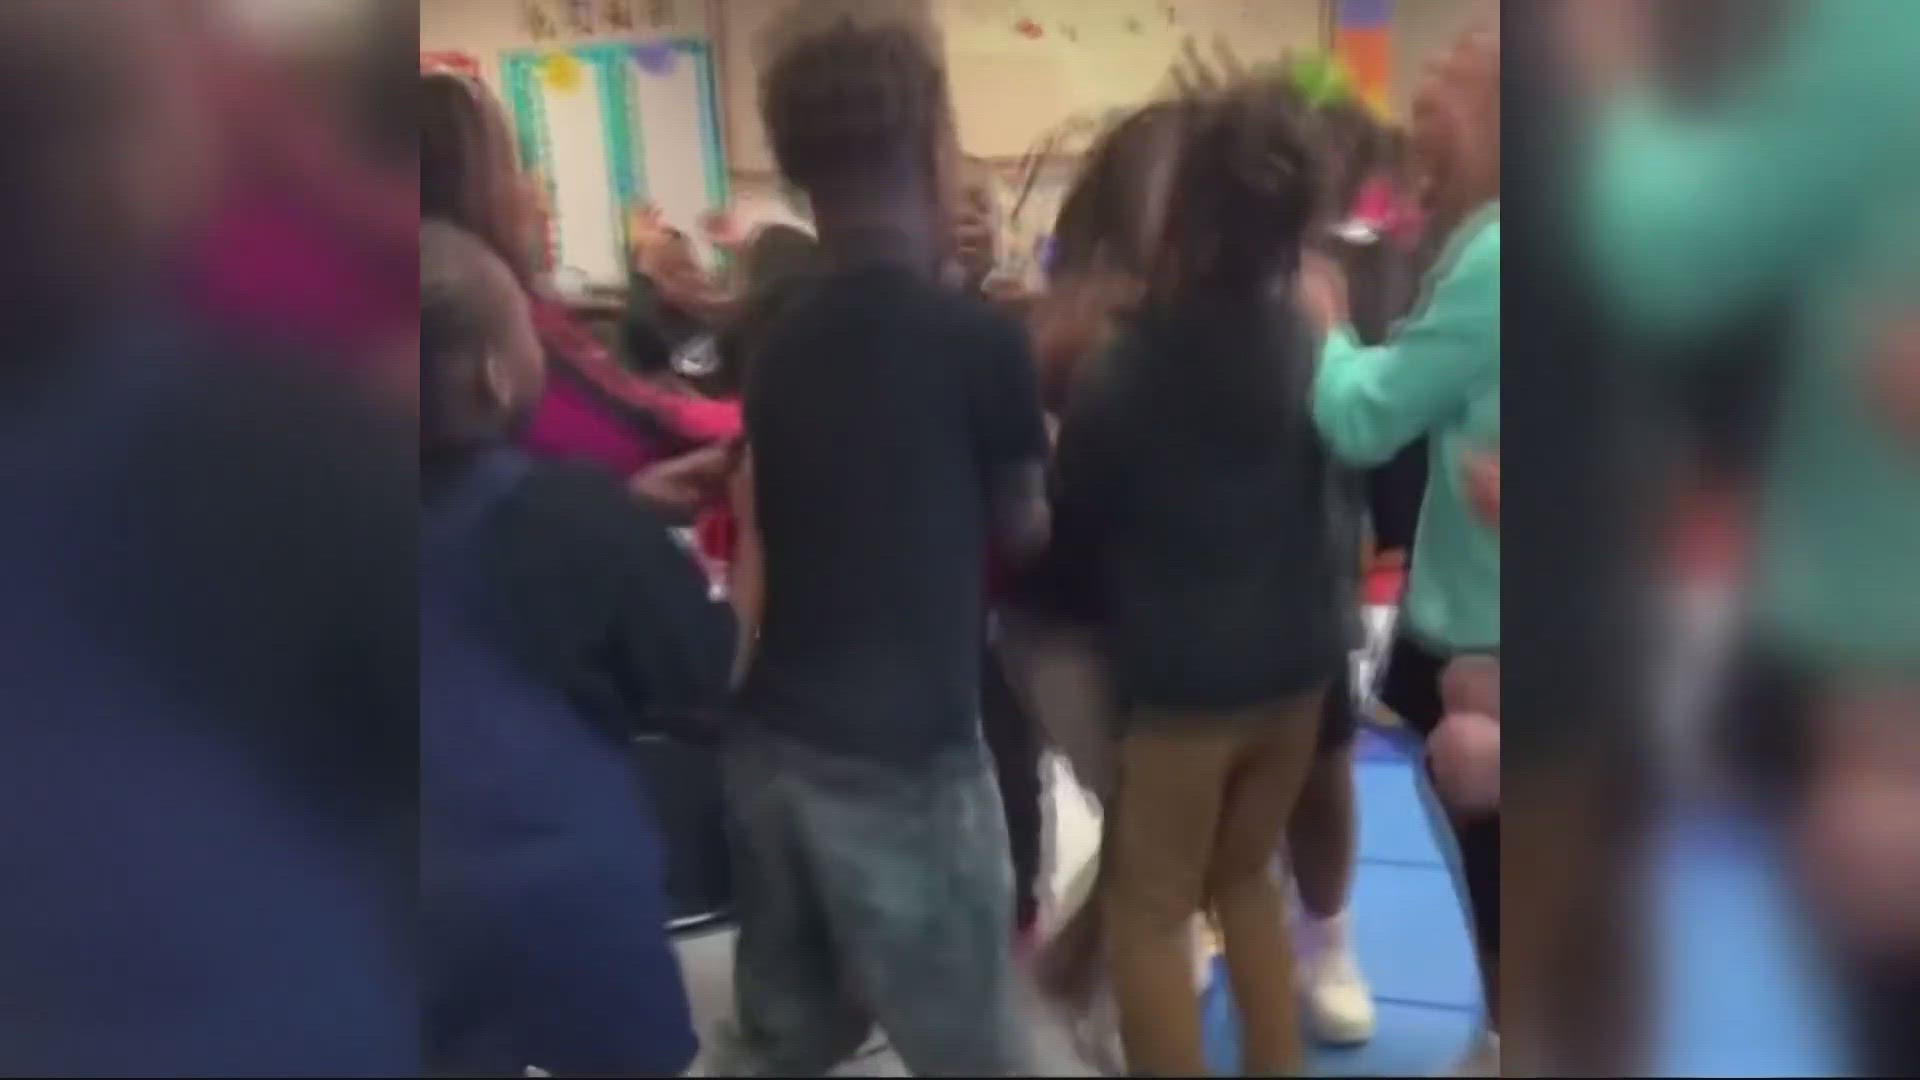 The cute video shows kiddos cheering for a student who answers a math question correctly, earning the whole class free time.